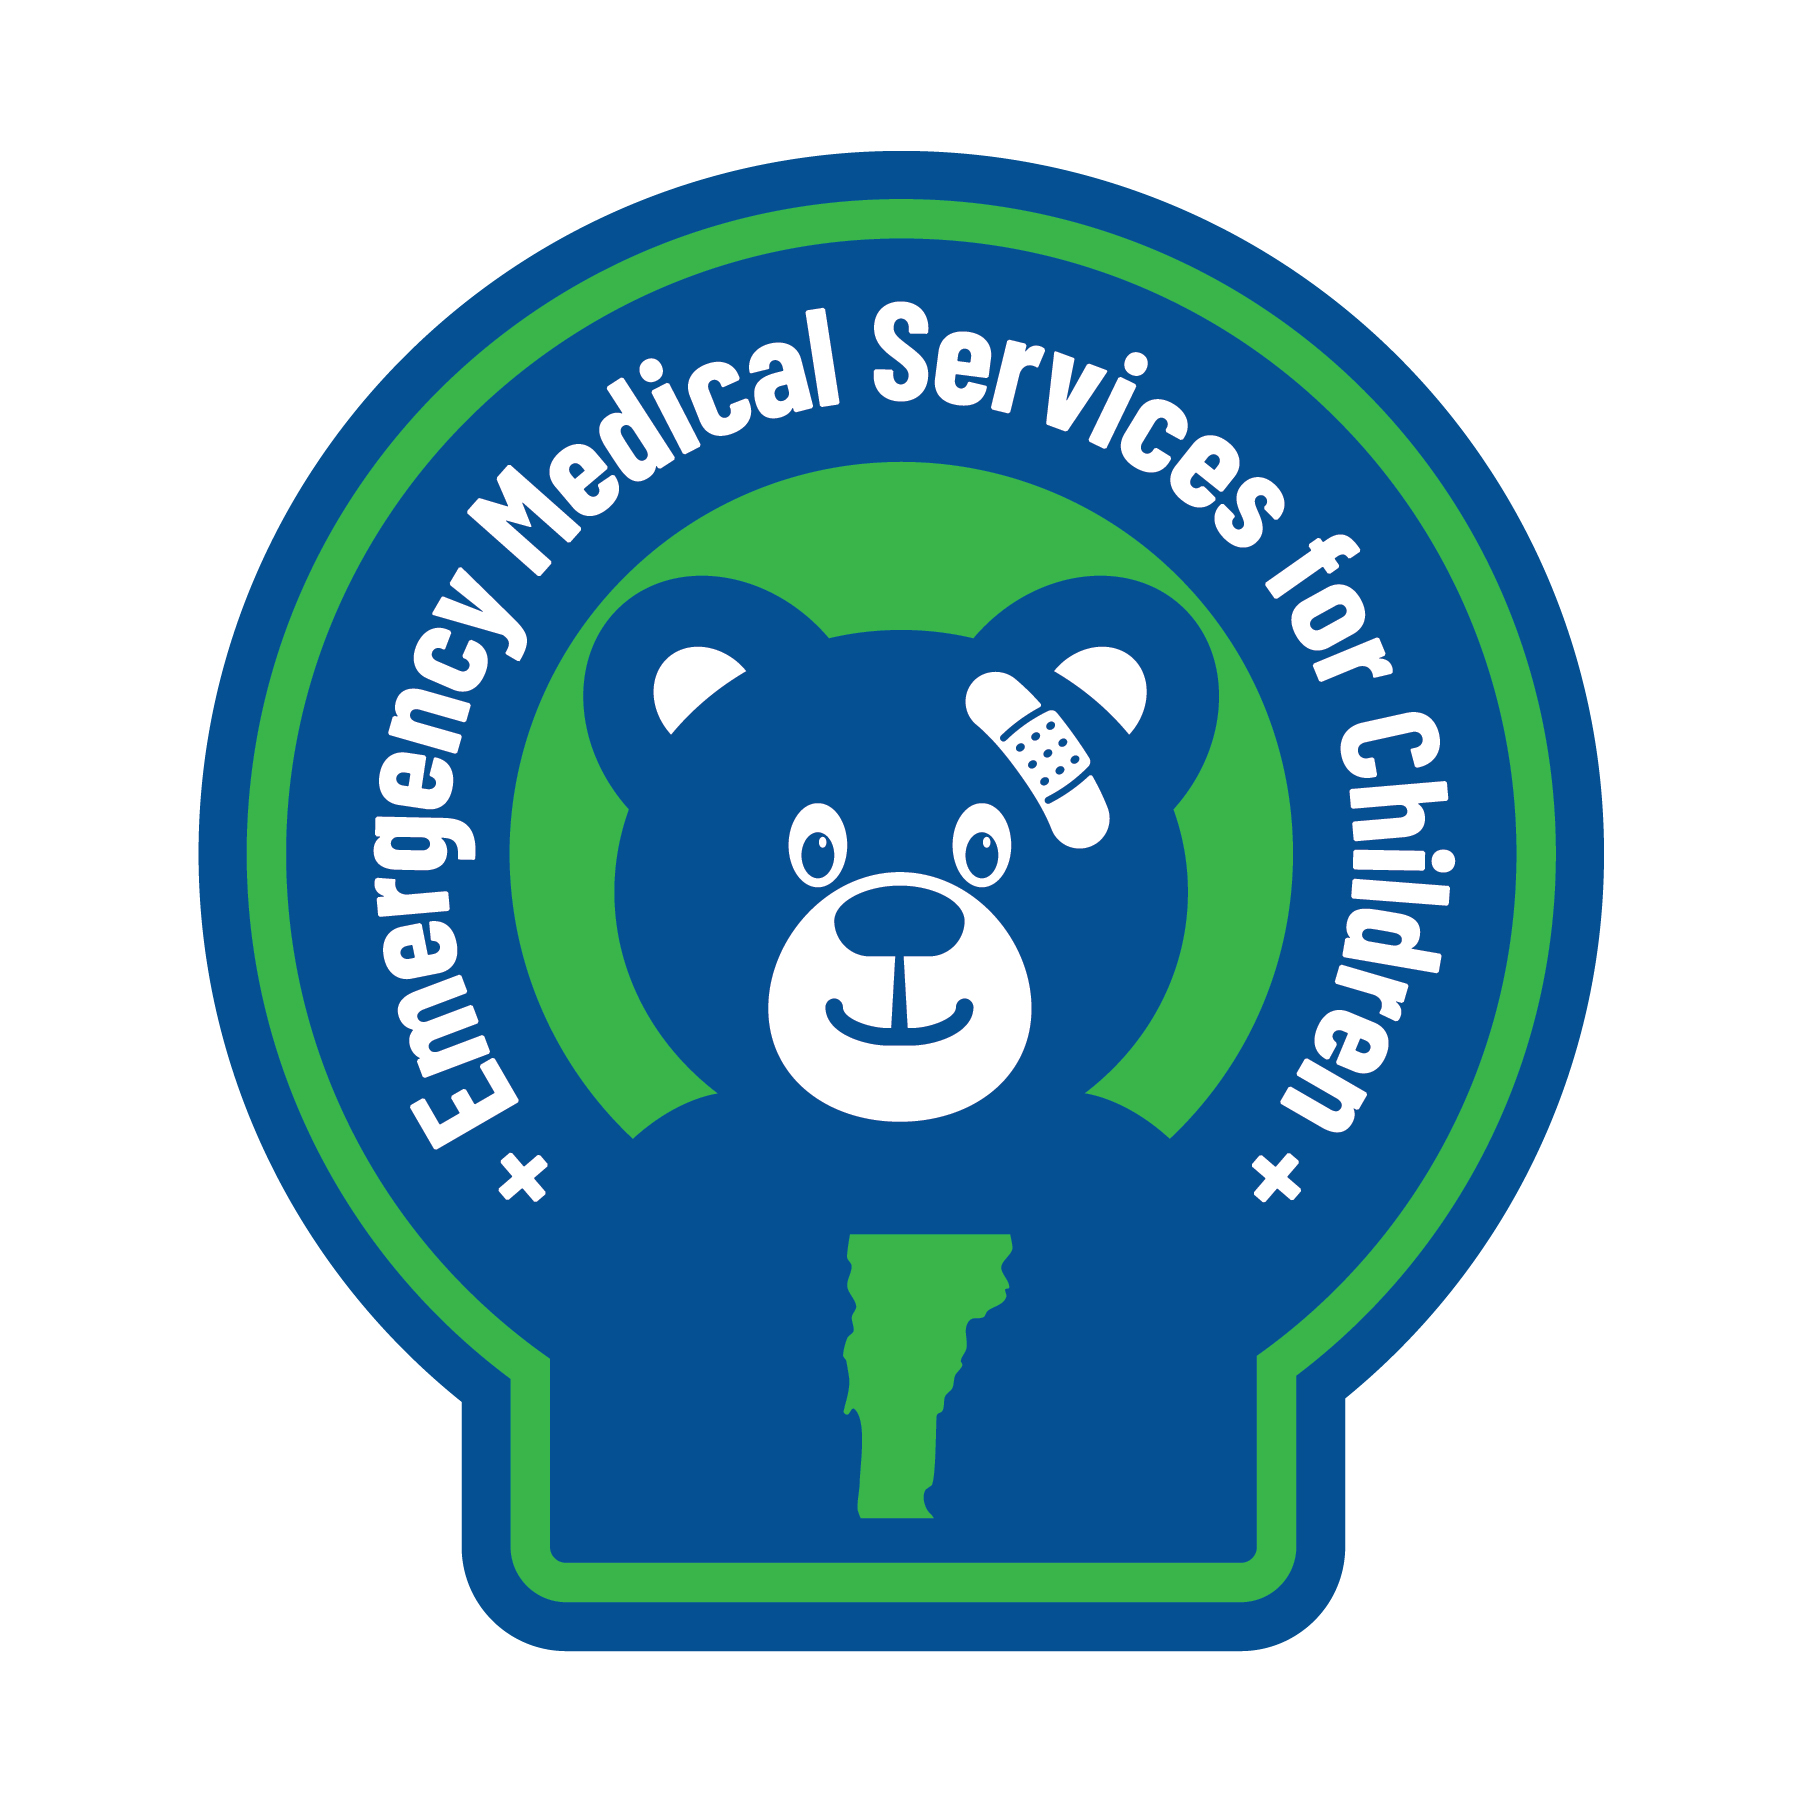 Emergency Medical Services for Children logo- a blue bear with a bandage on head